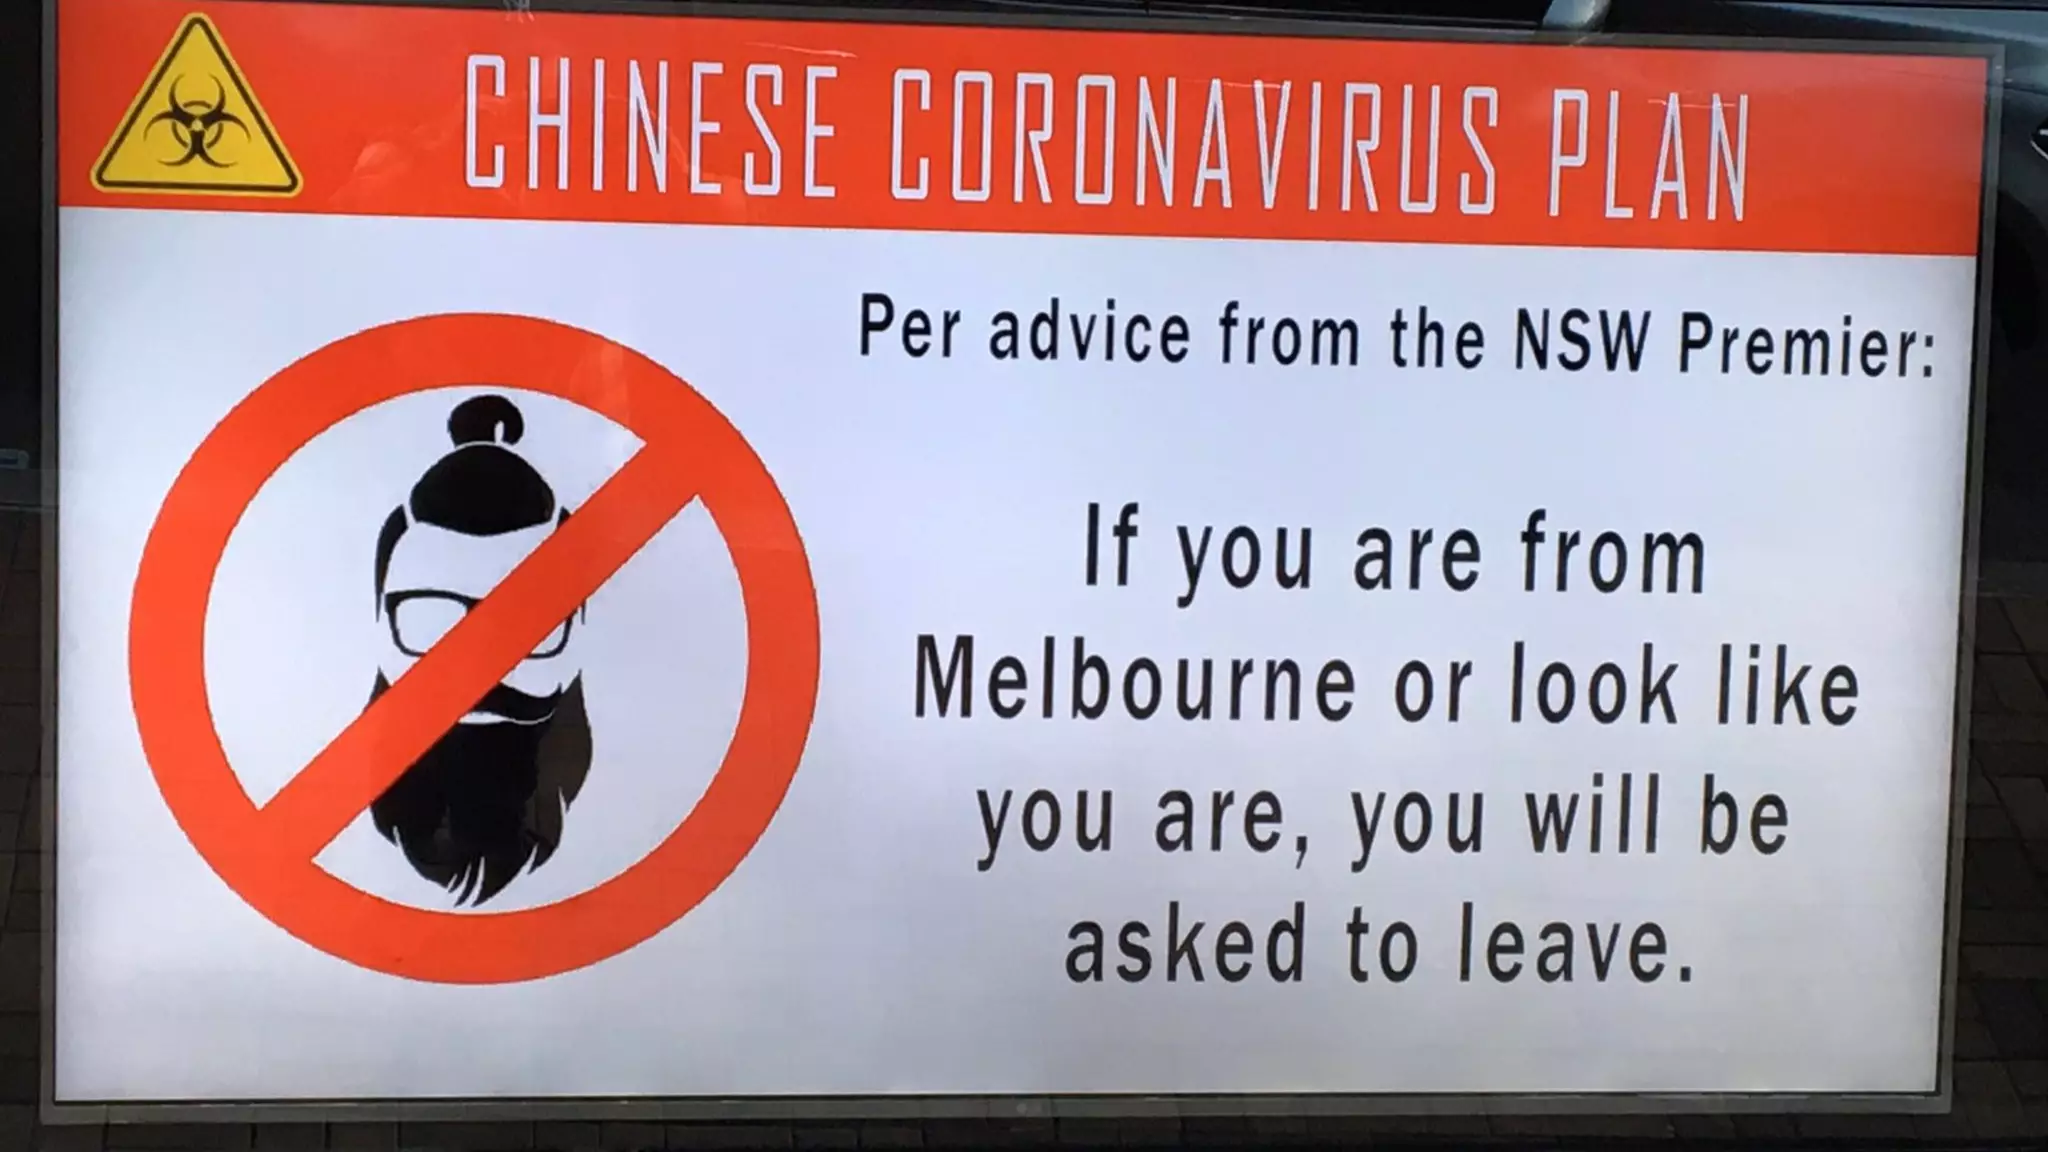 Sydney Pub Under Fire For ‘Chinese Coronavirus Plan’ And Dig Against People From Melbourne